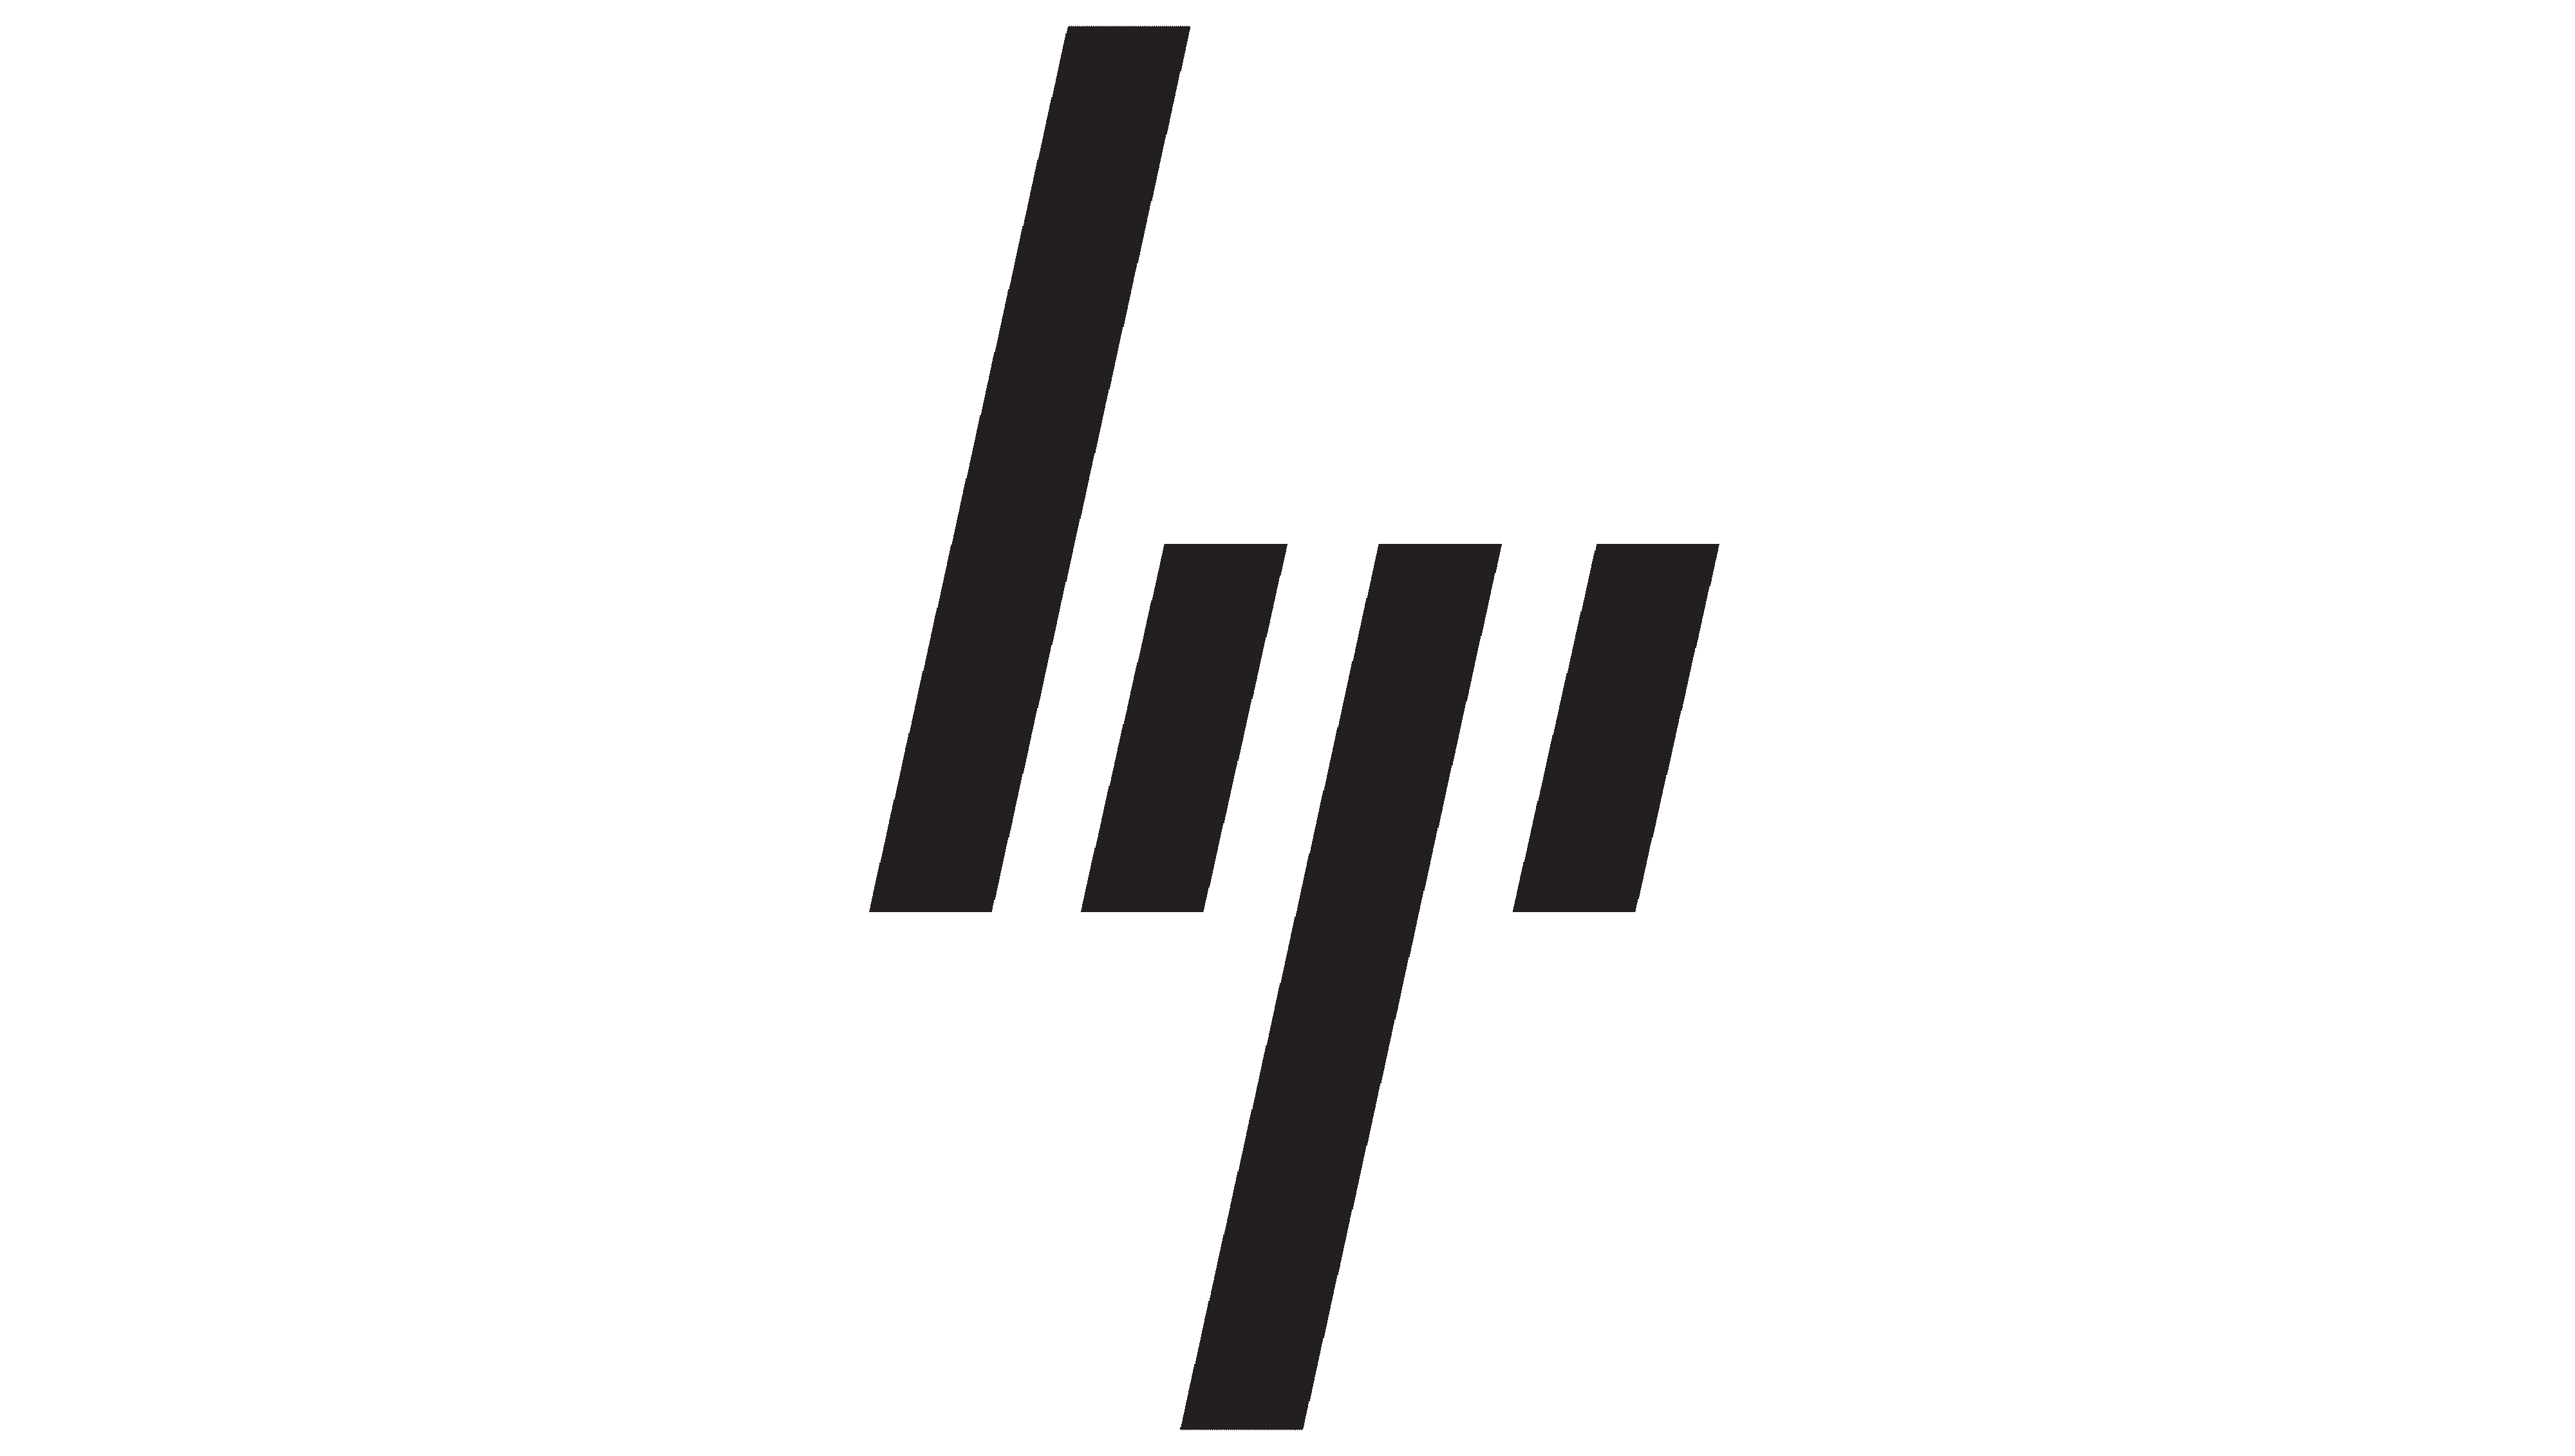 HP hardware devices